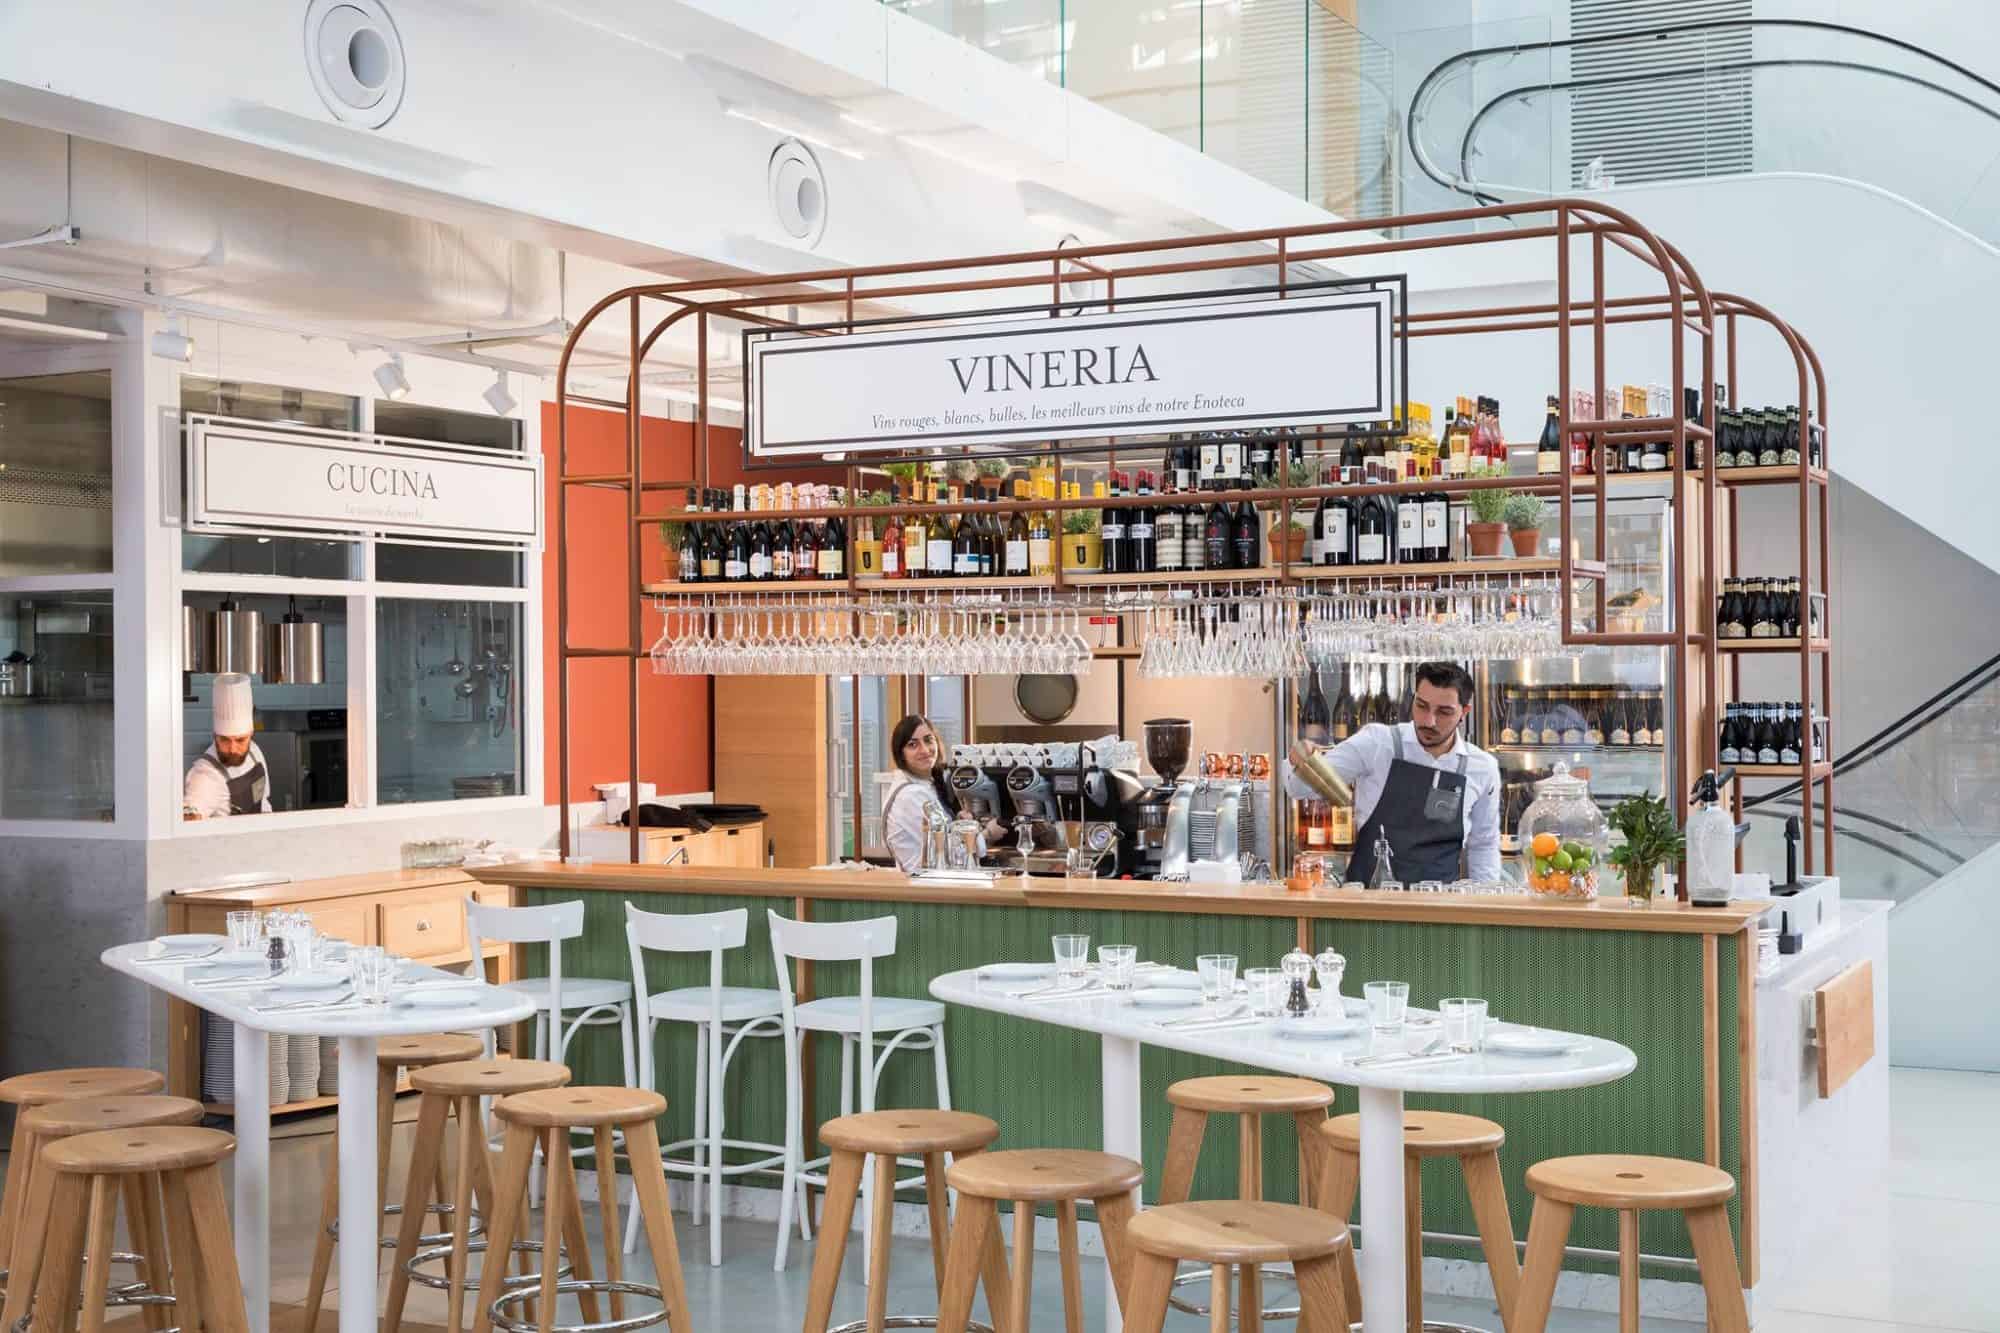 The bar and antipasti restaurant at Eataly in Paris comes with bright and light interiors.